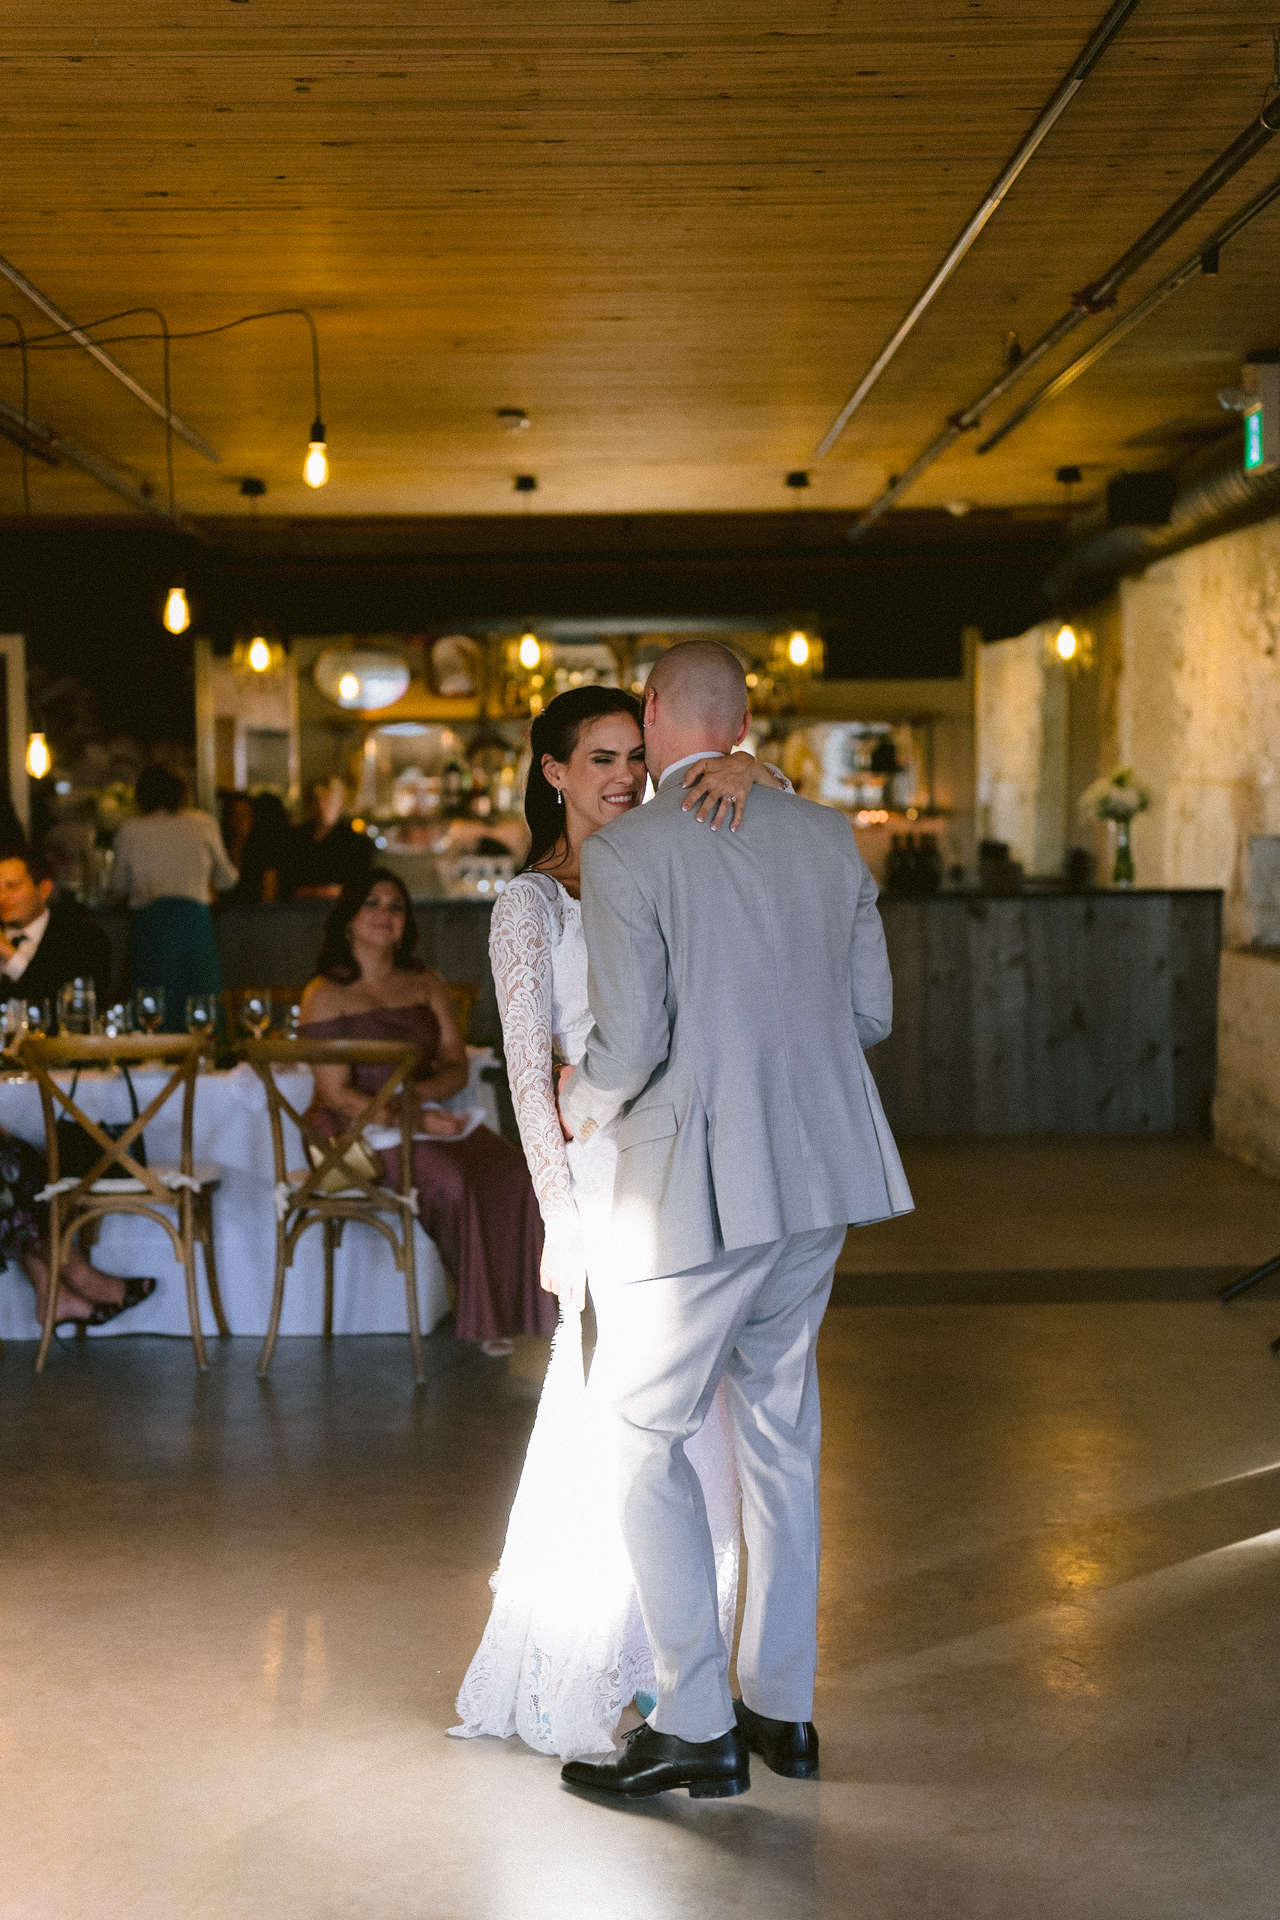 A couple sharing a dance in a warmly lit venue, with guests seated in the background